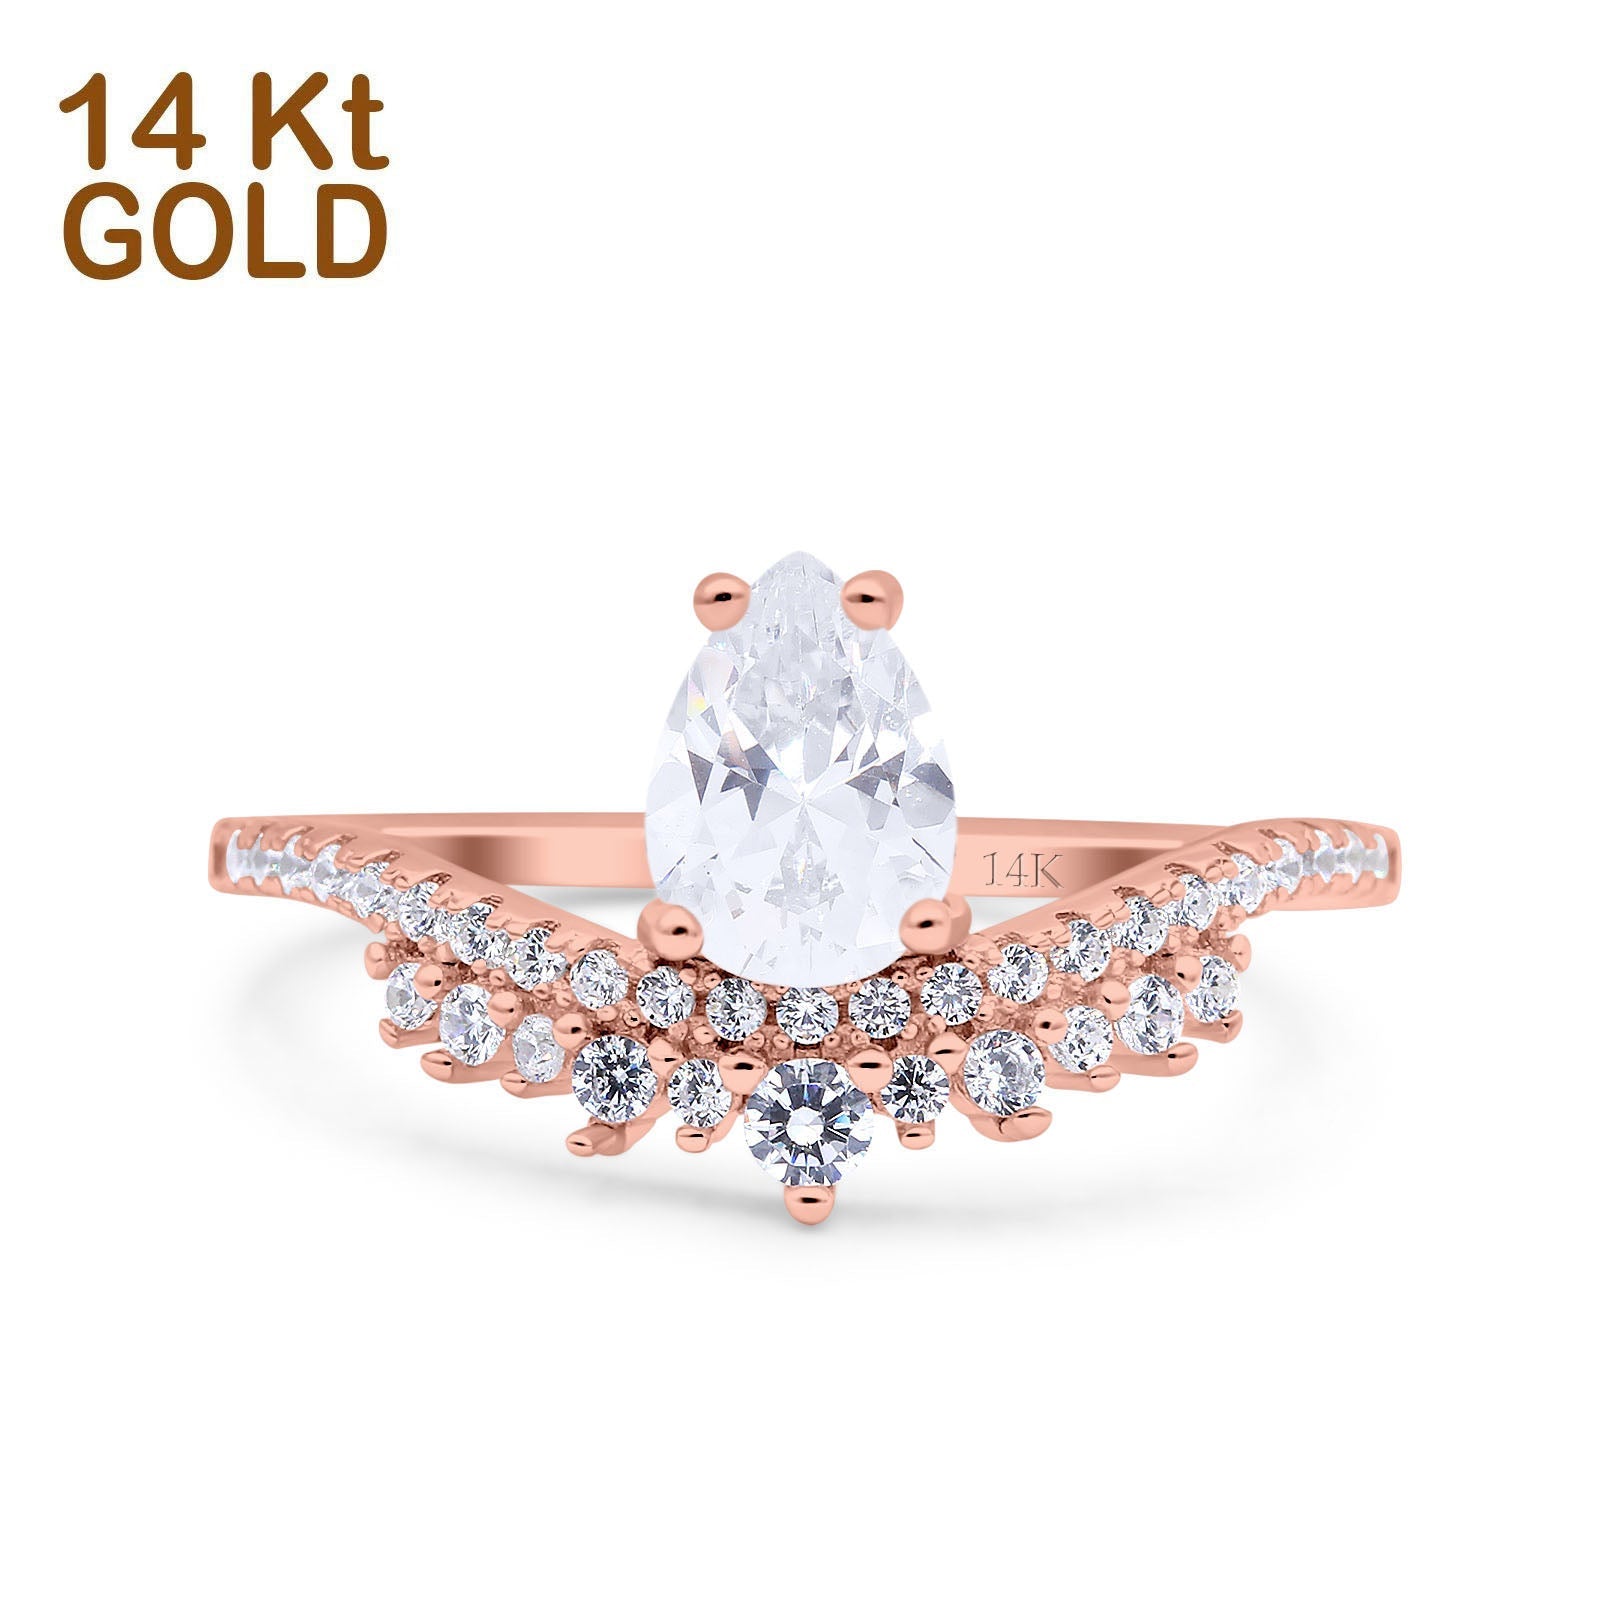 14K Gold Art Deco Solitaire Accent Pear Shape Bridal Simulated Cubic Zirconia Wedding Engagement Ring